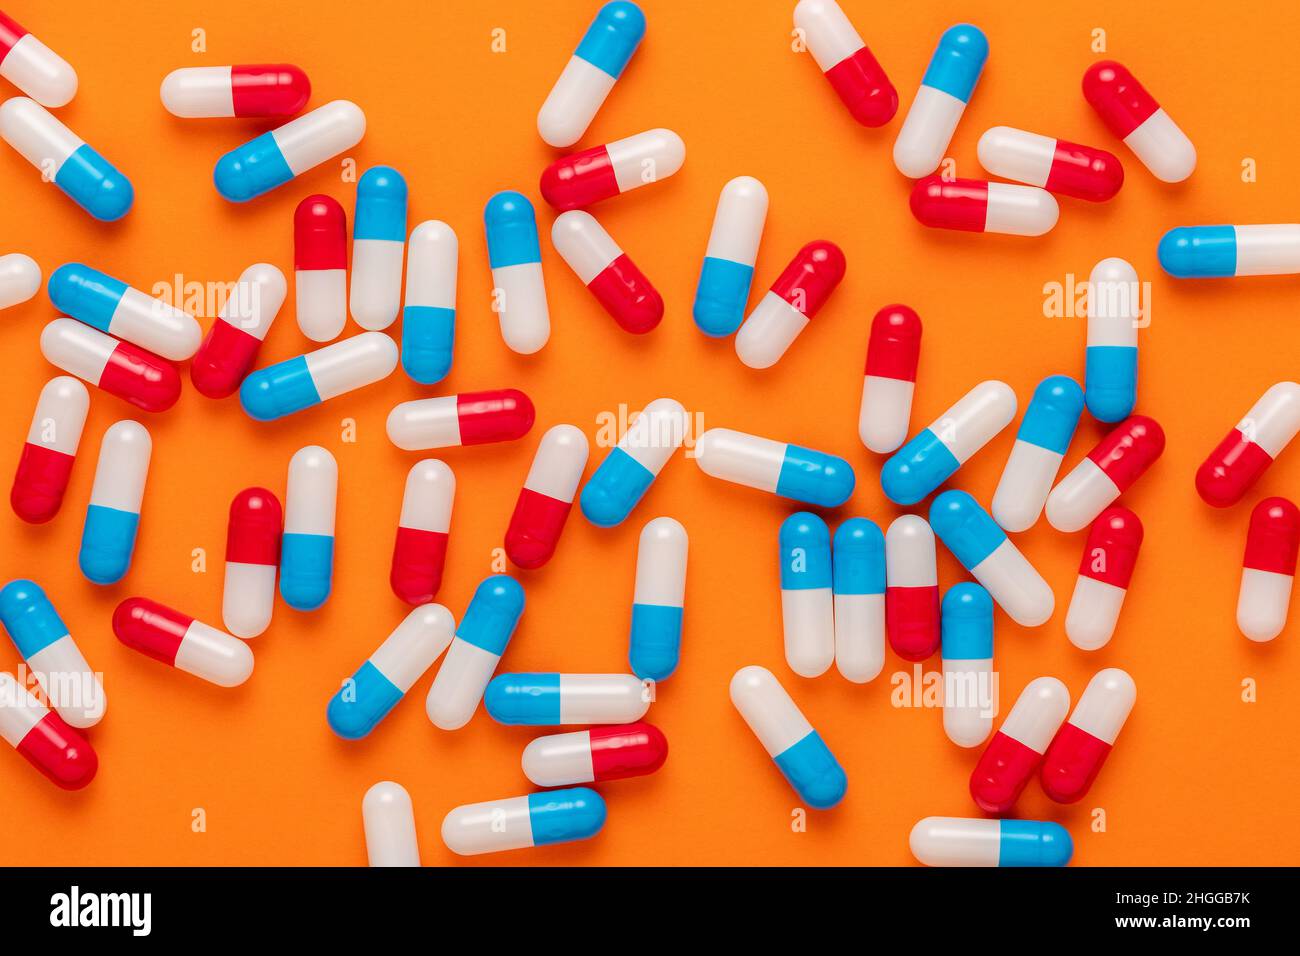 Creative composition with colorful pills on orange background. Minimal concept. Stock Photo